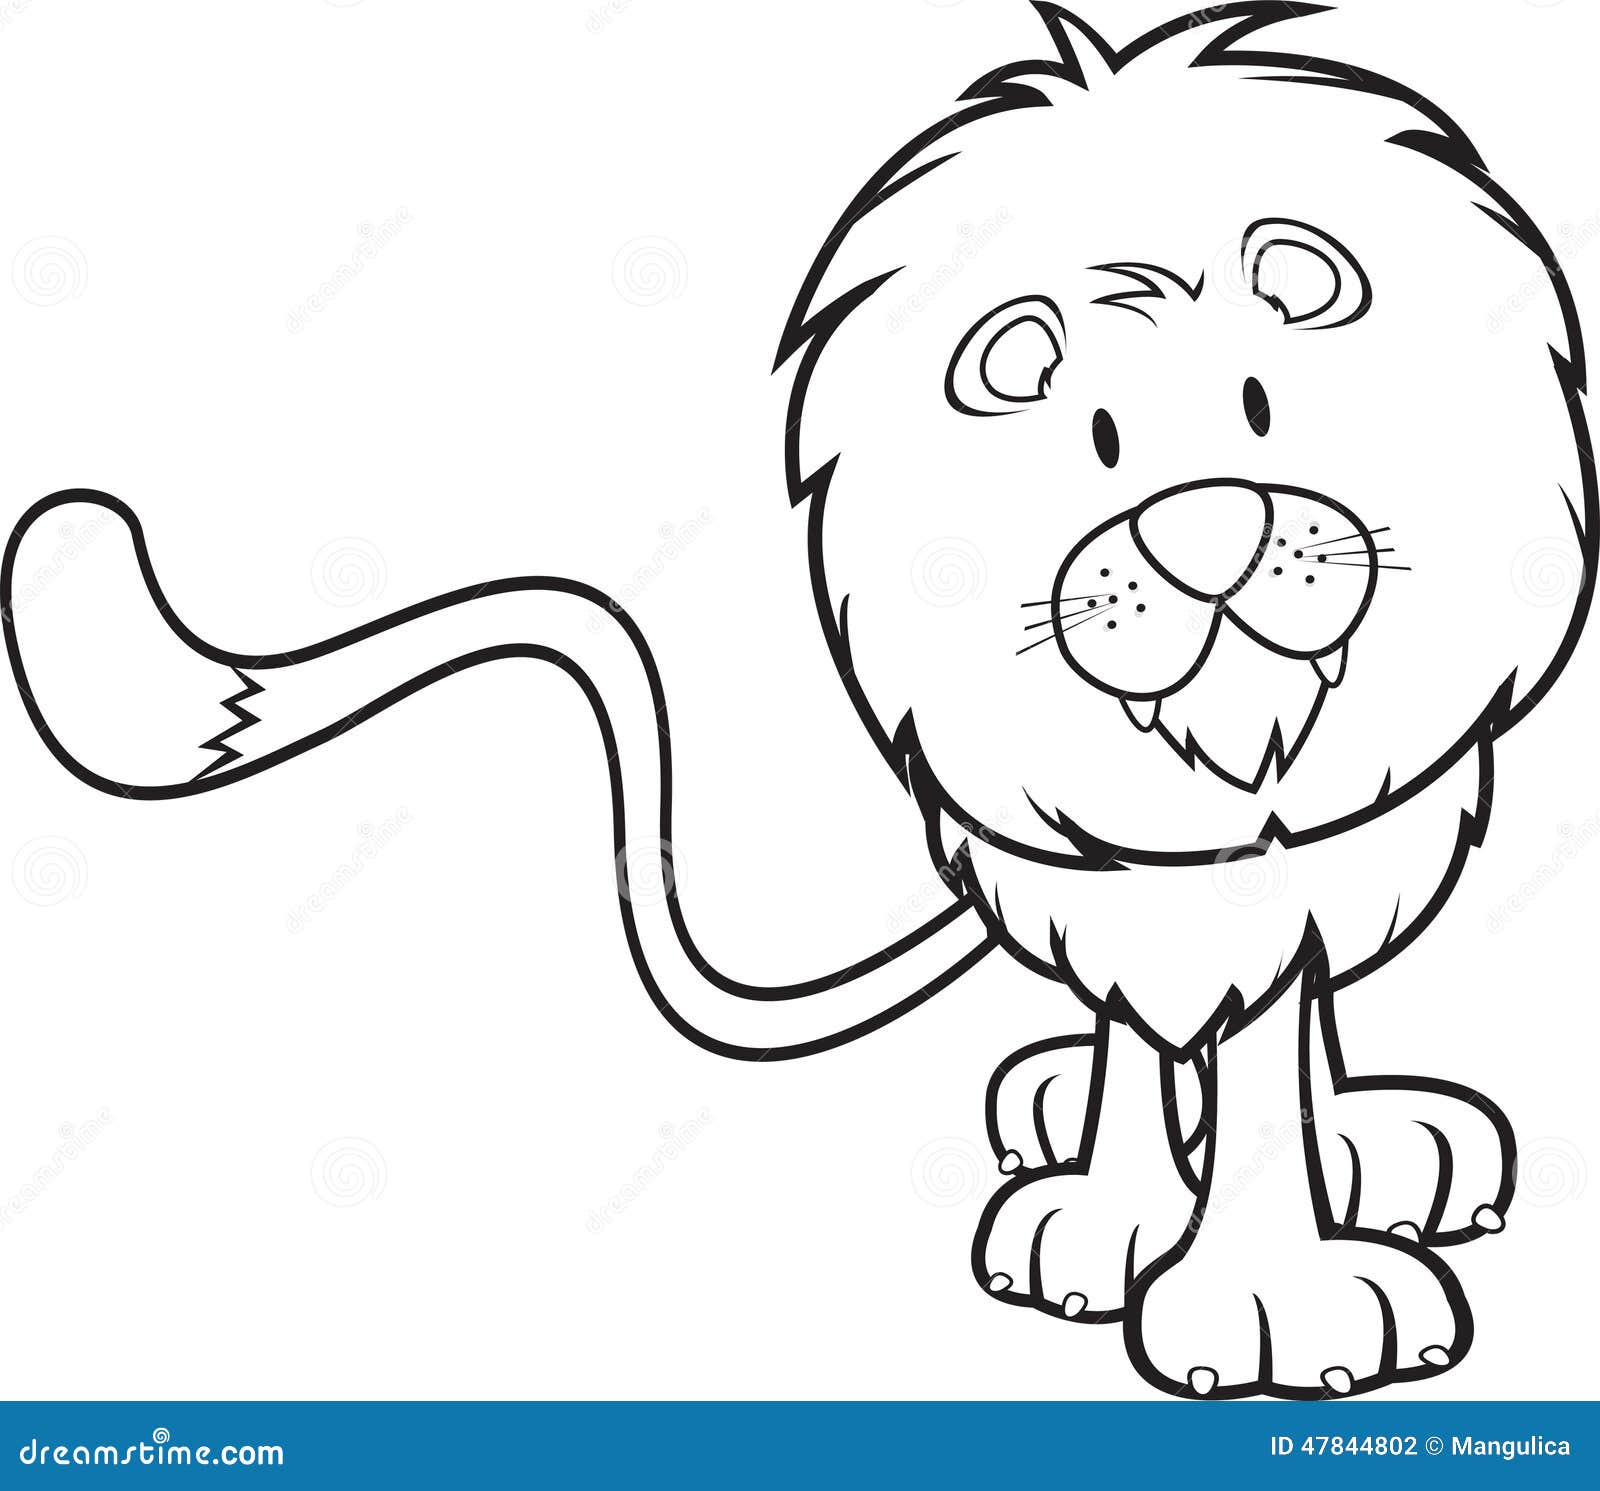 Cute lion coloring book stock vector. Illustration of funny - 47844802